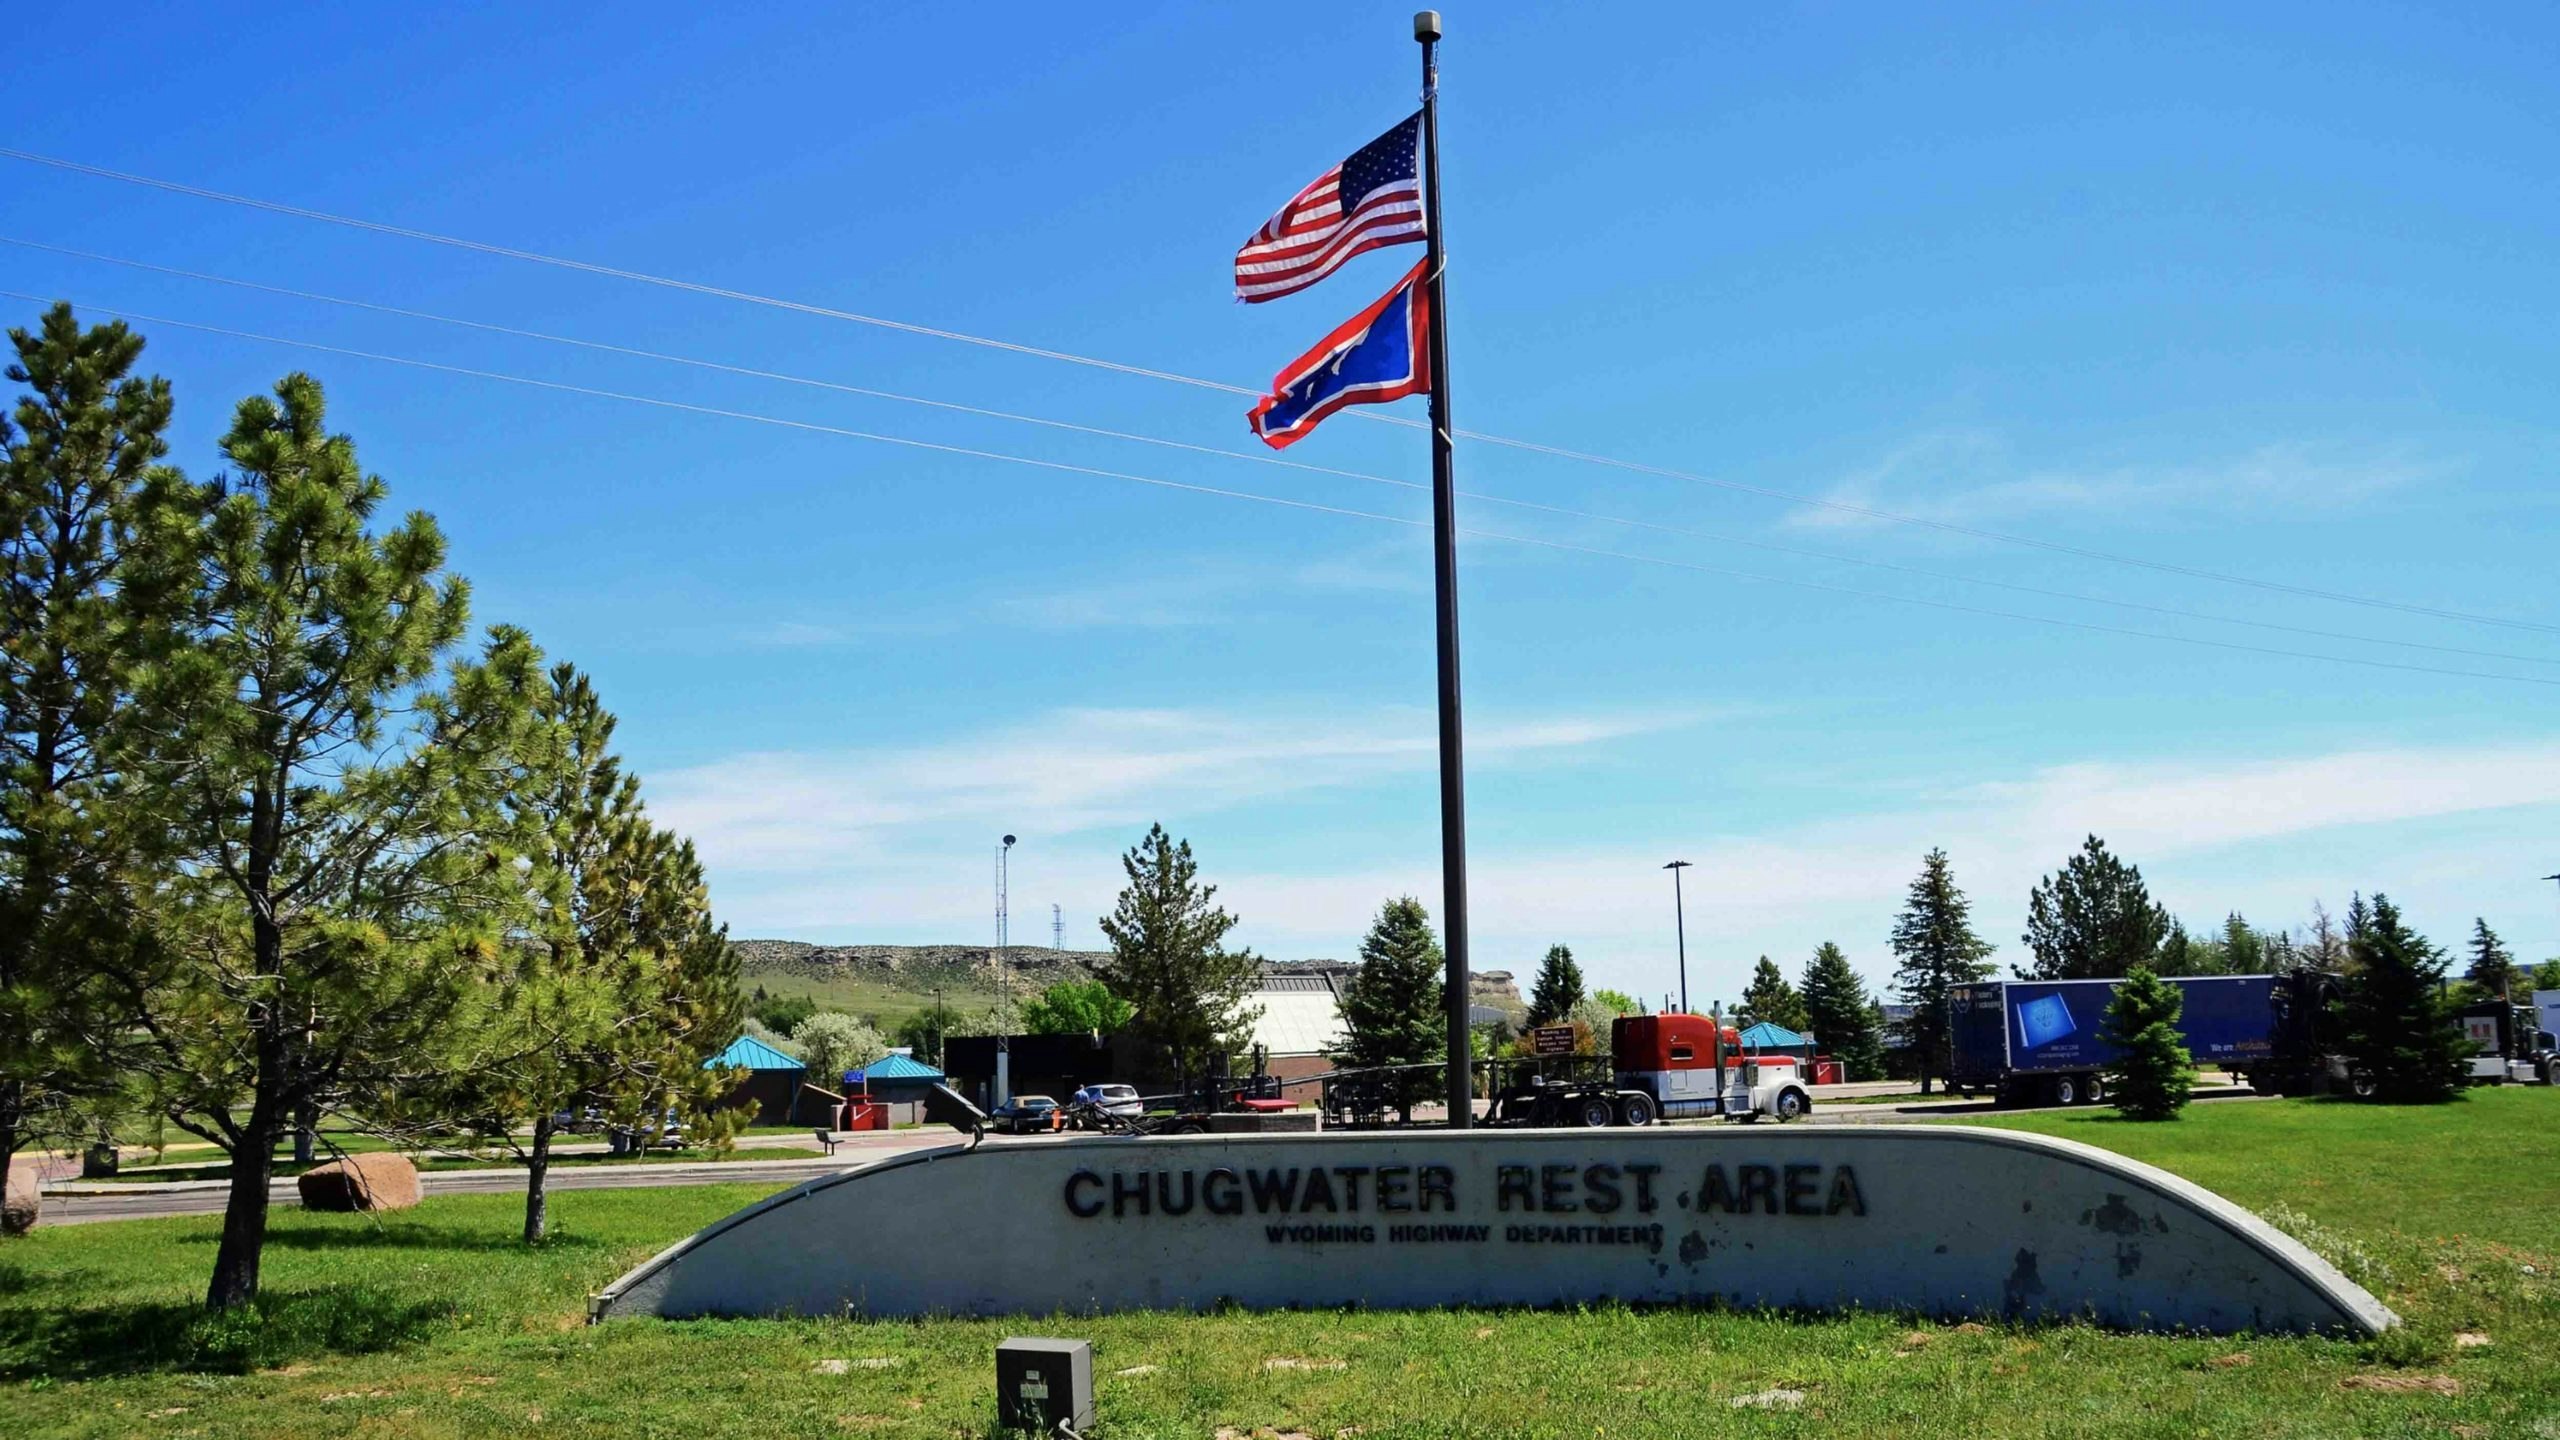 Chugwater rest area scaled